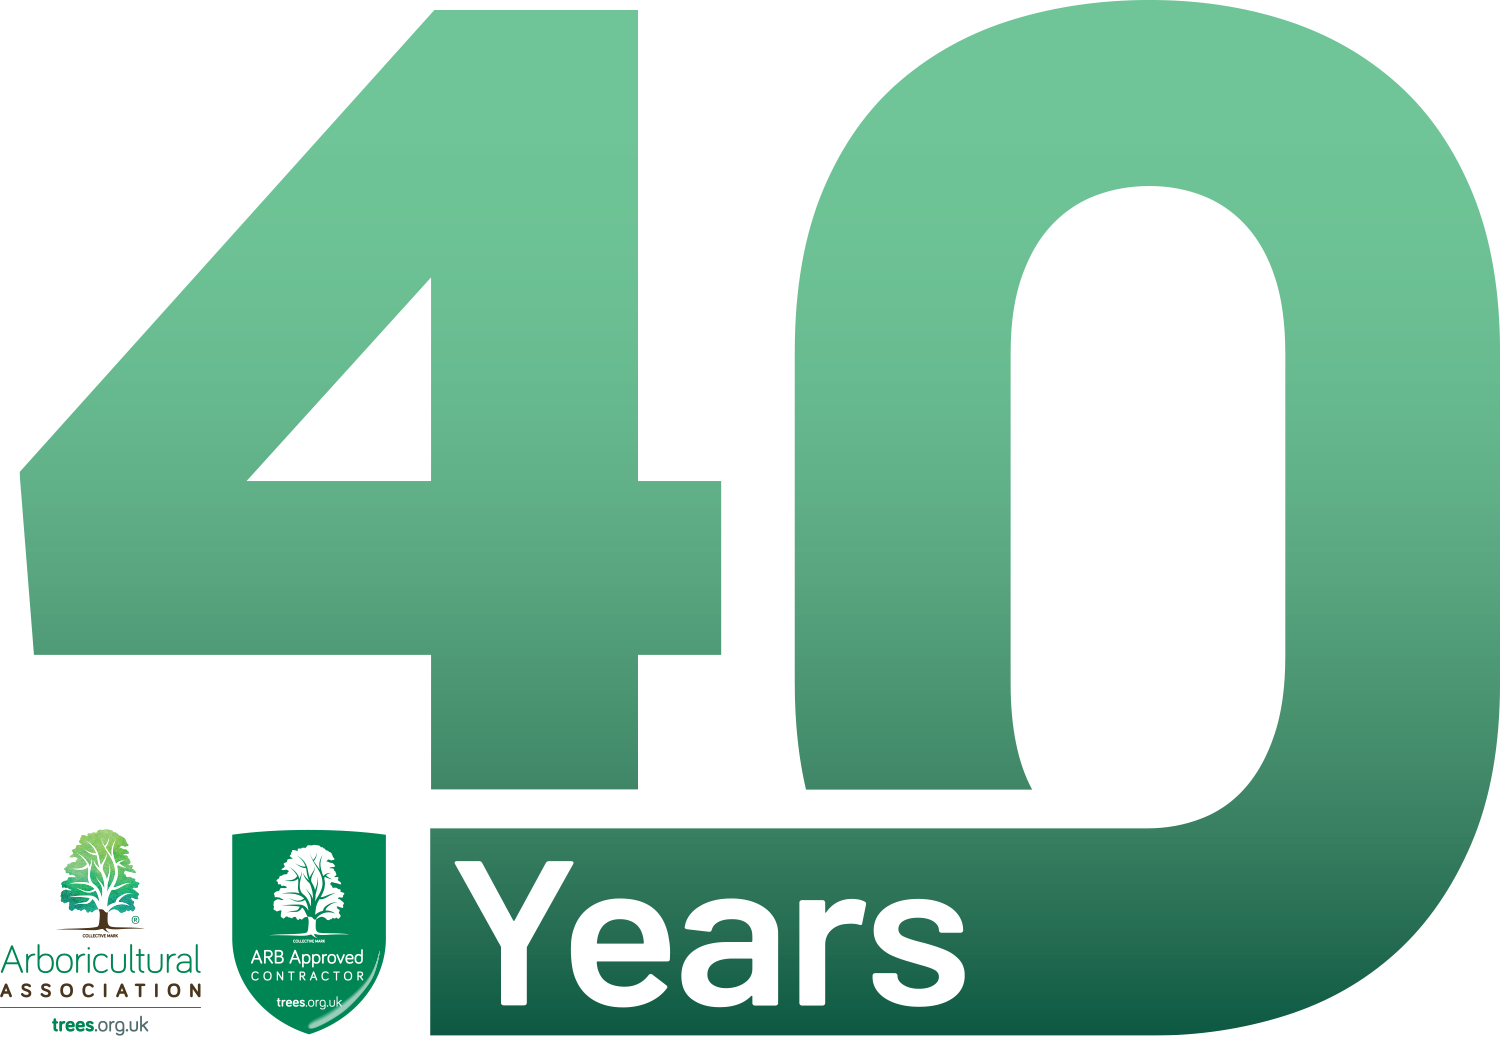 Celebrating 40 years of being an ARB Approved Contractor